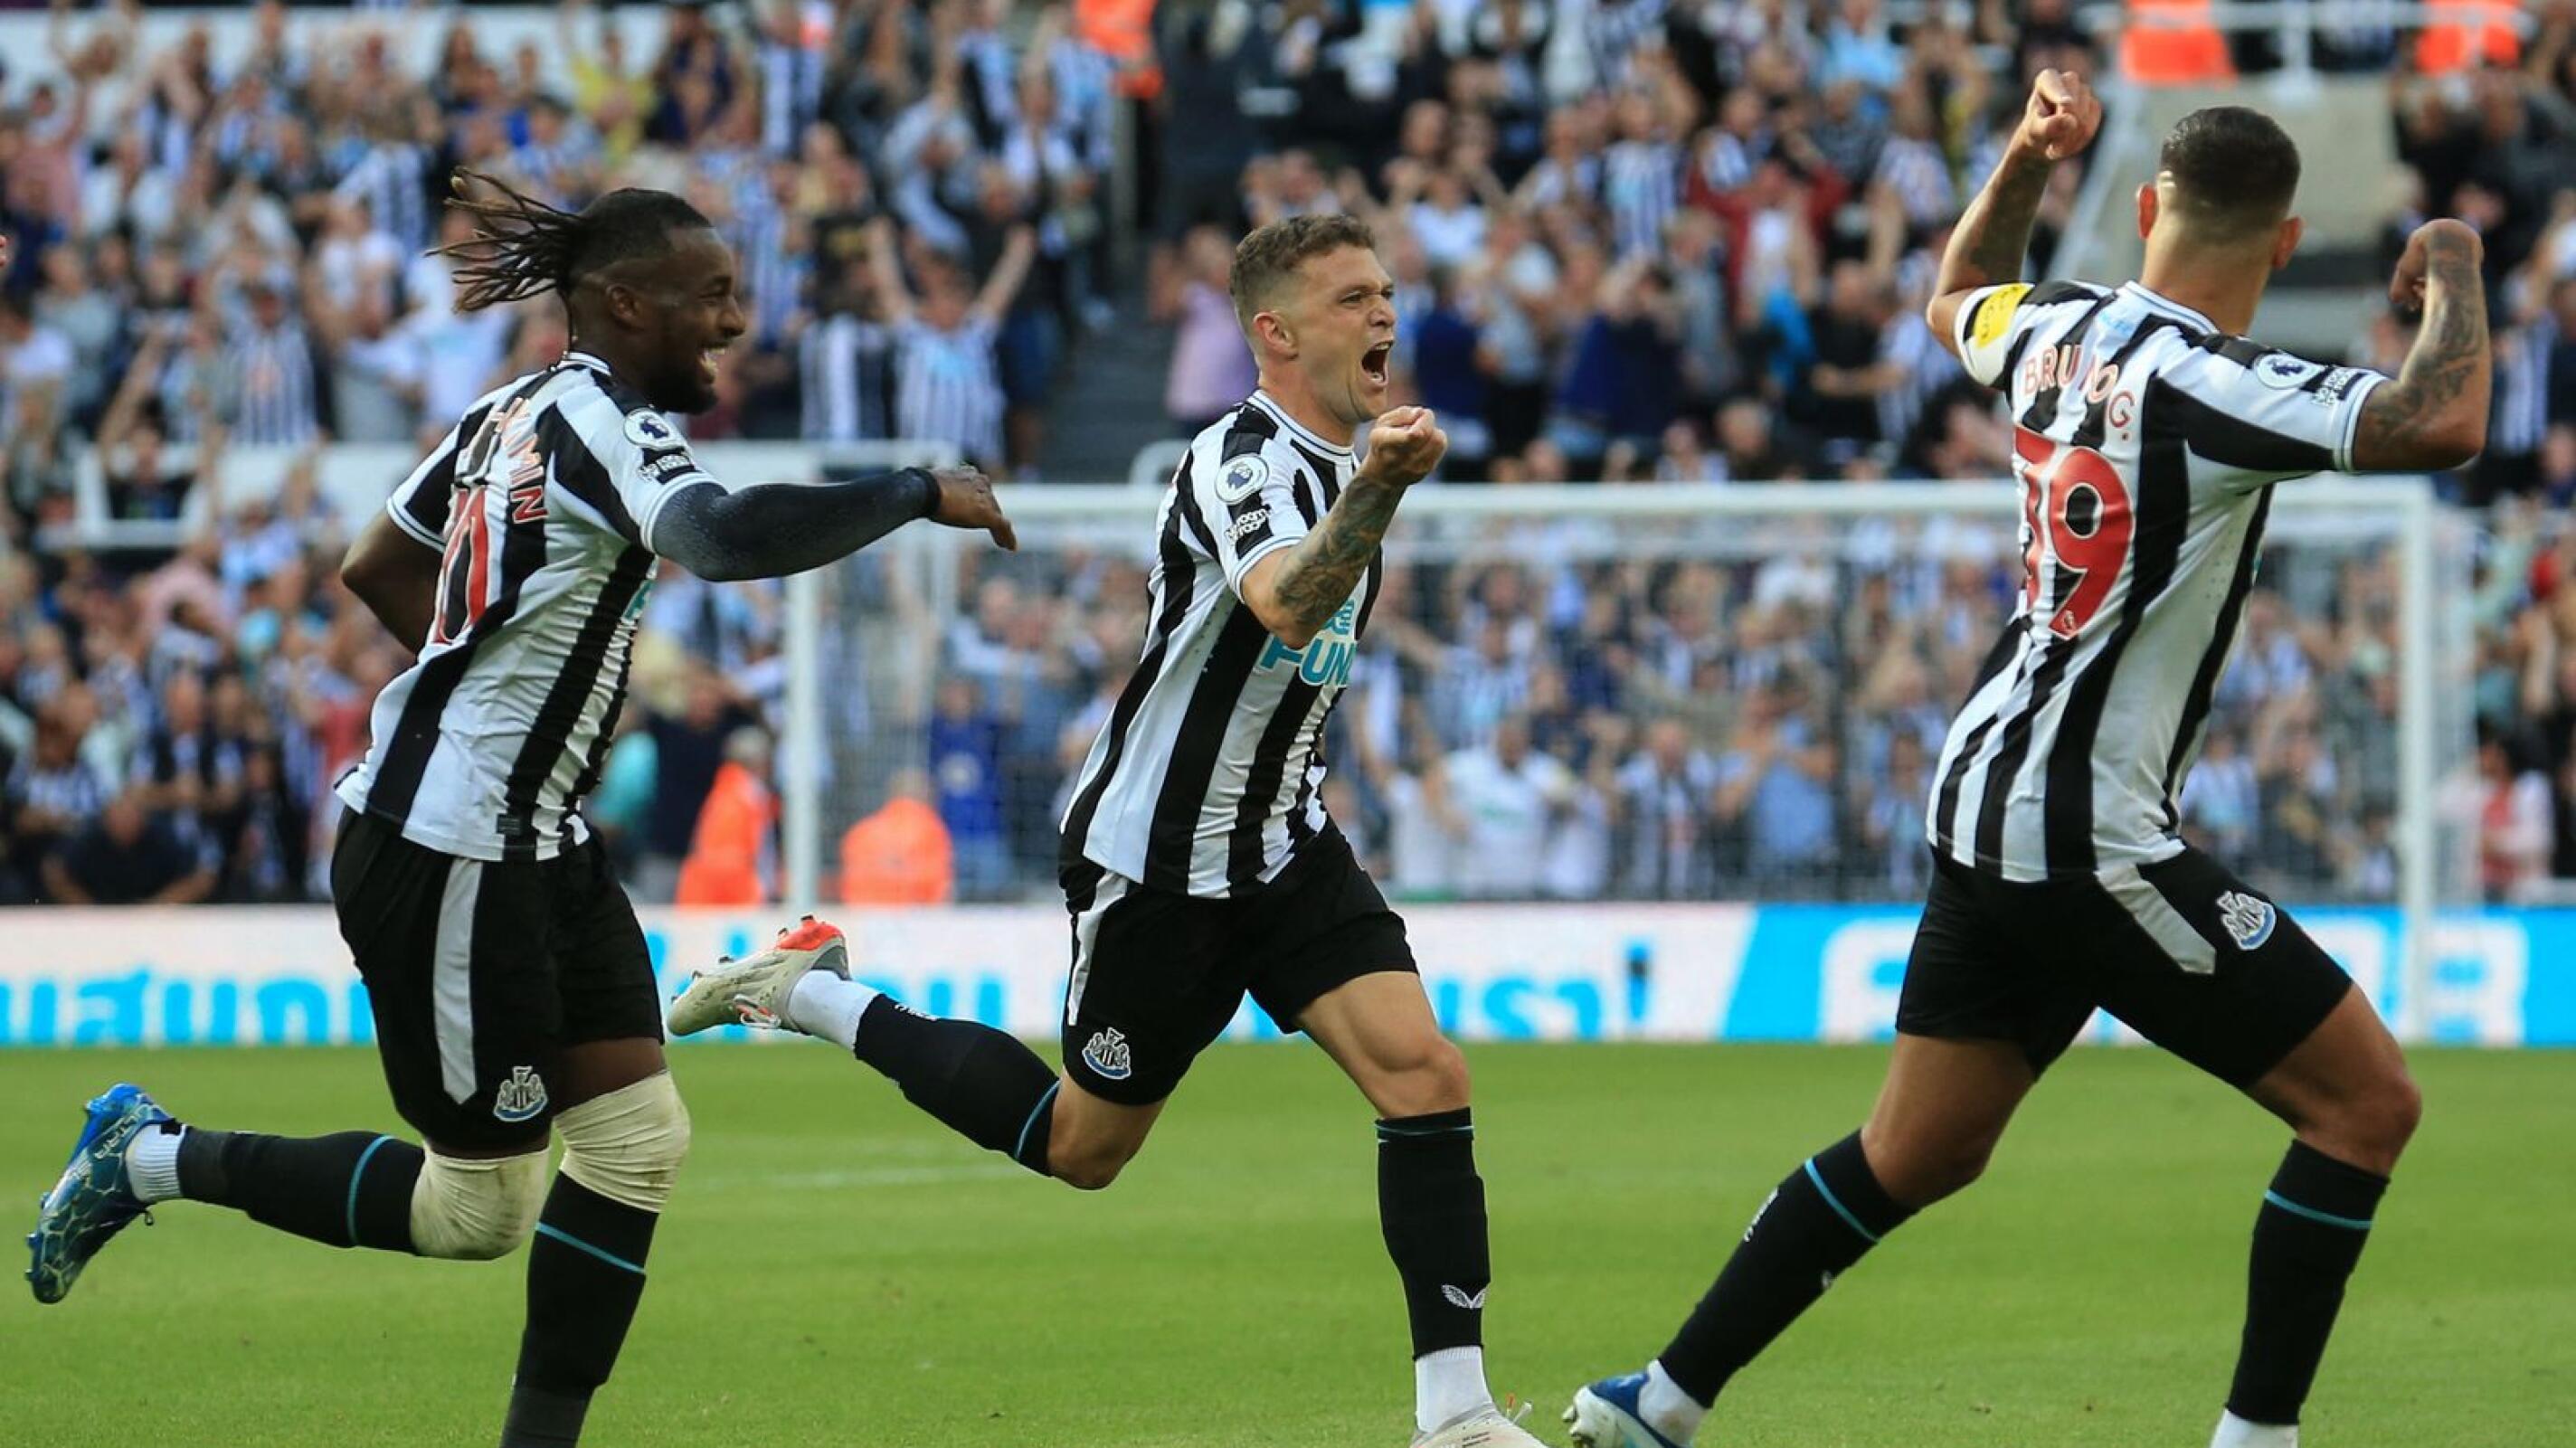 Newcastle United's Kieran Trippier celebrates after scoring against Manchester City at St James' Park in Newcastle on Sunday